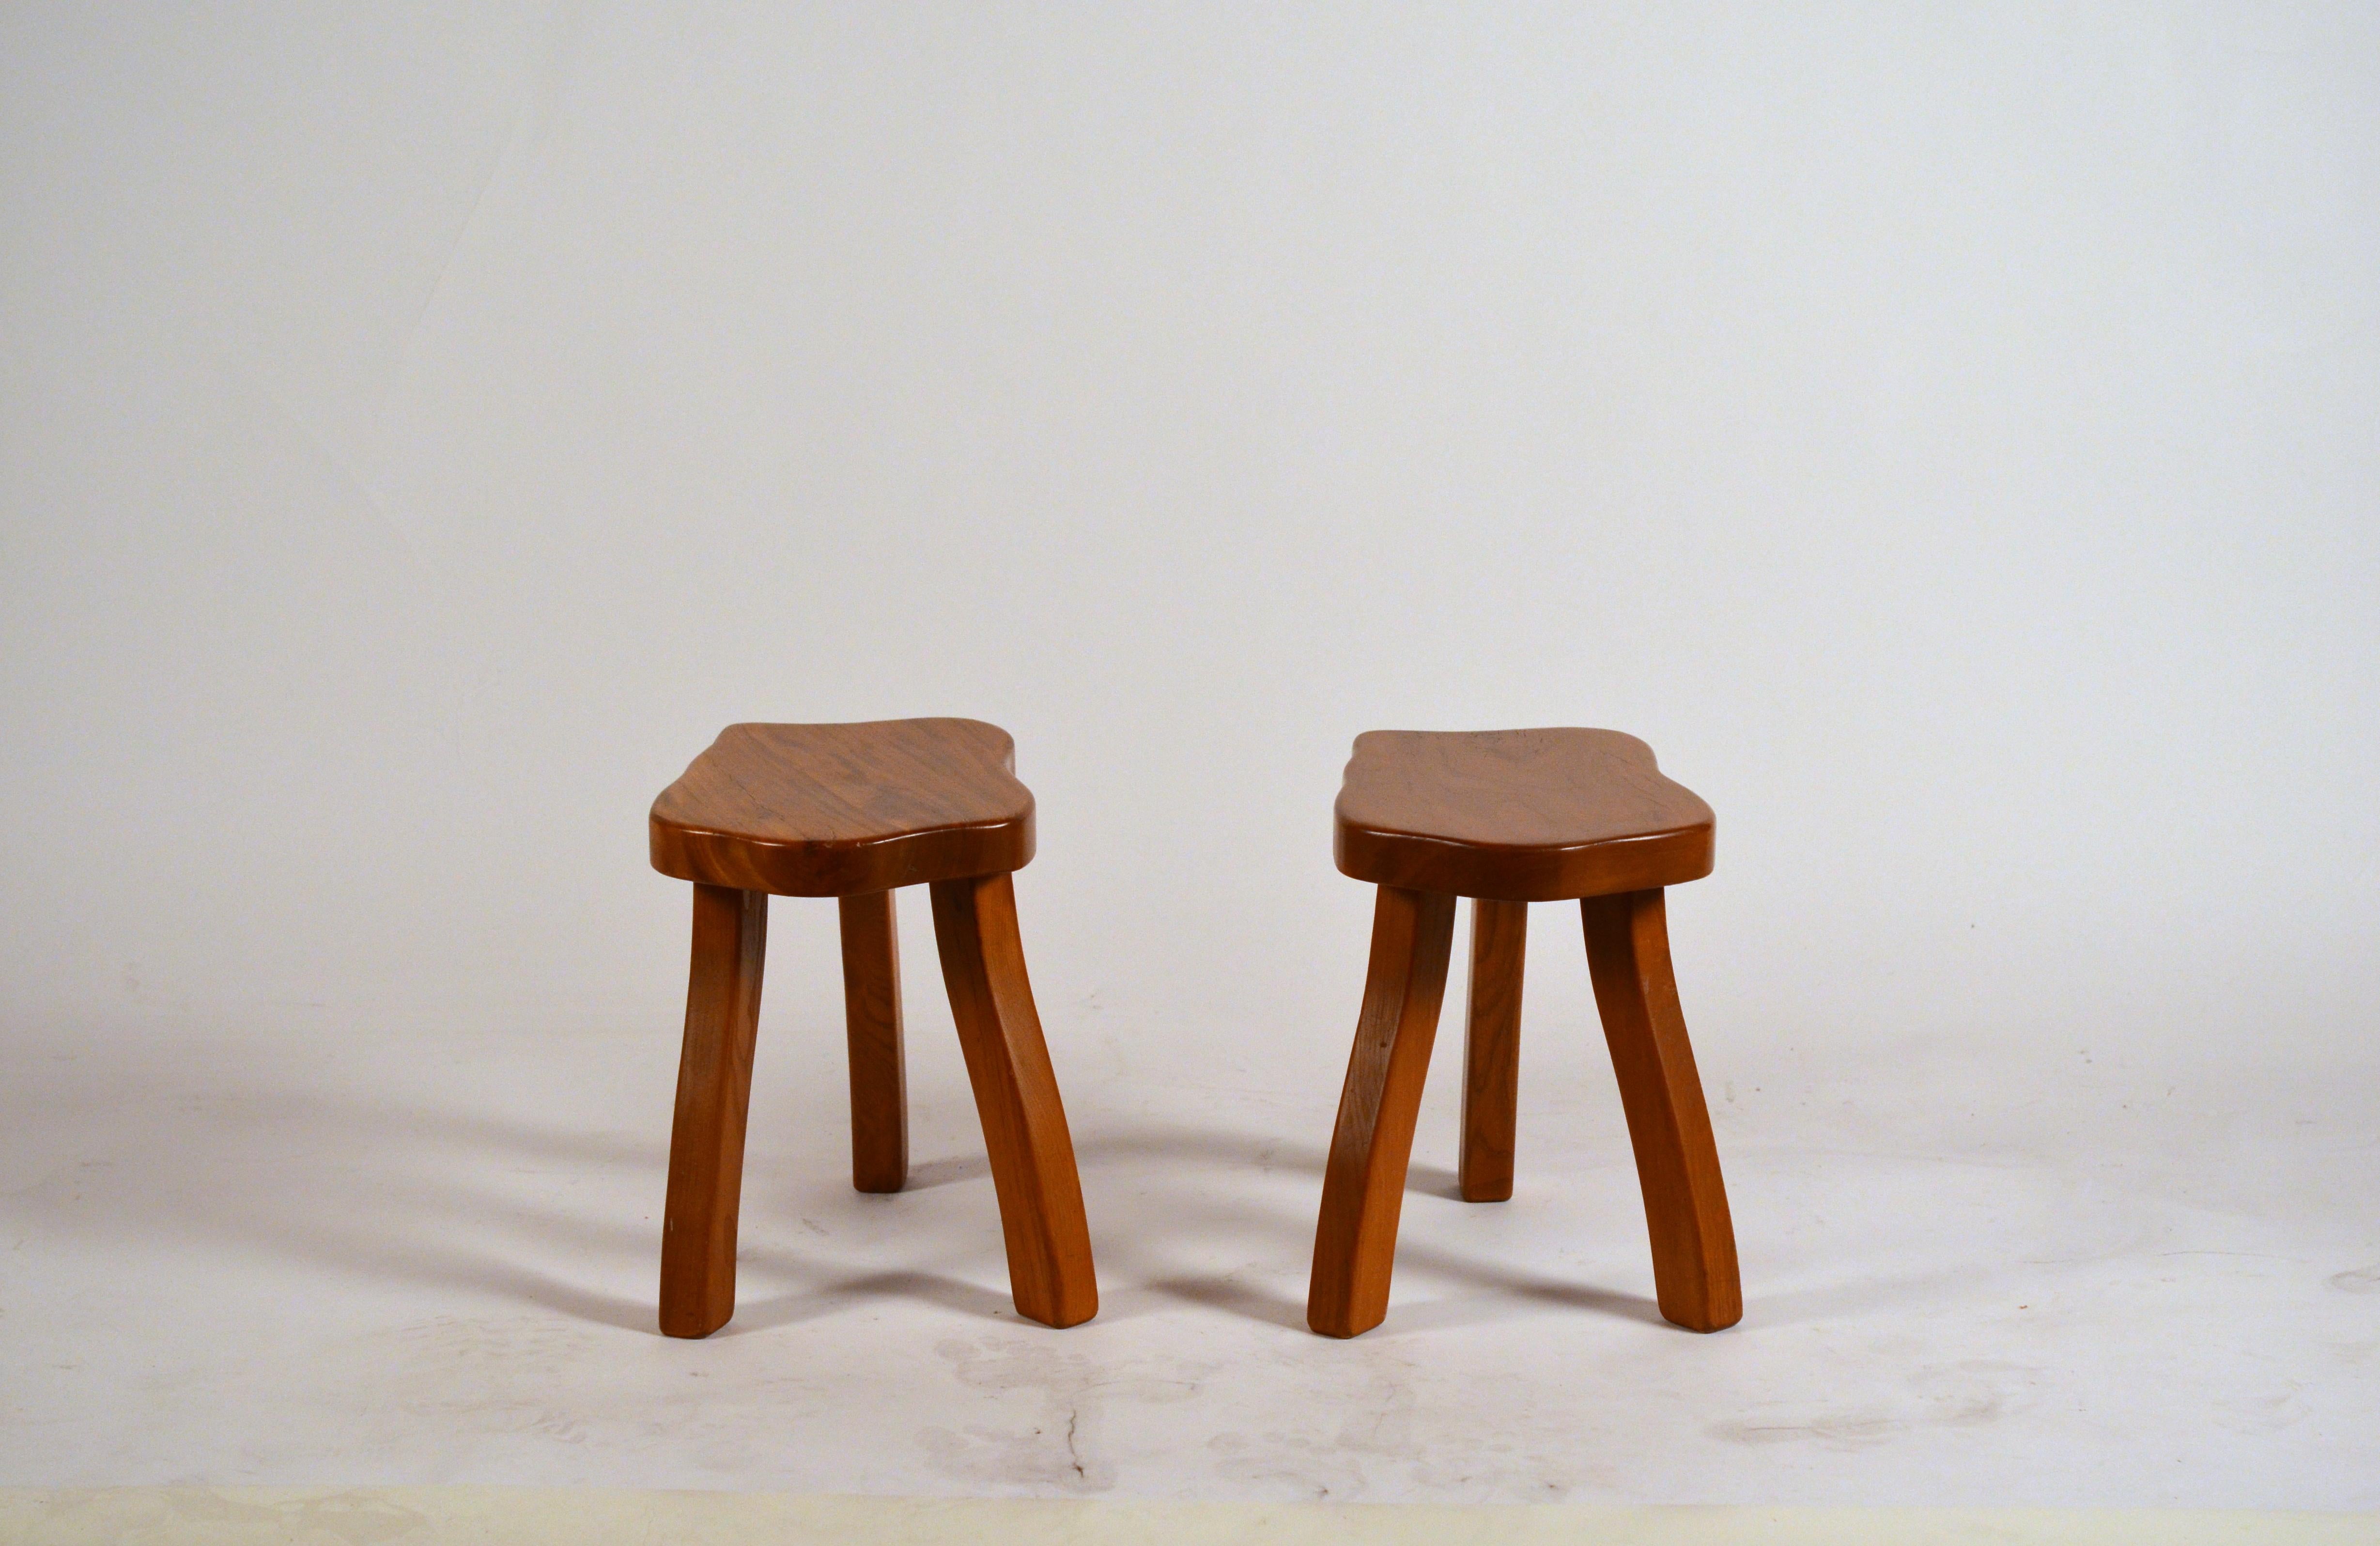 Hand-Carved Pair of Polished Walnut Tripod Stools in the Style of Charlotte Perriand